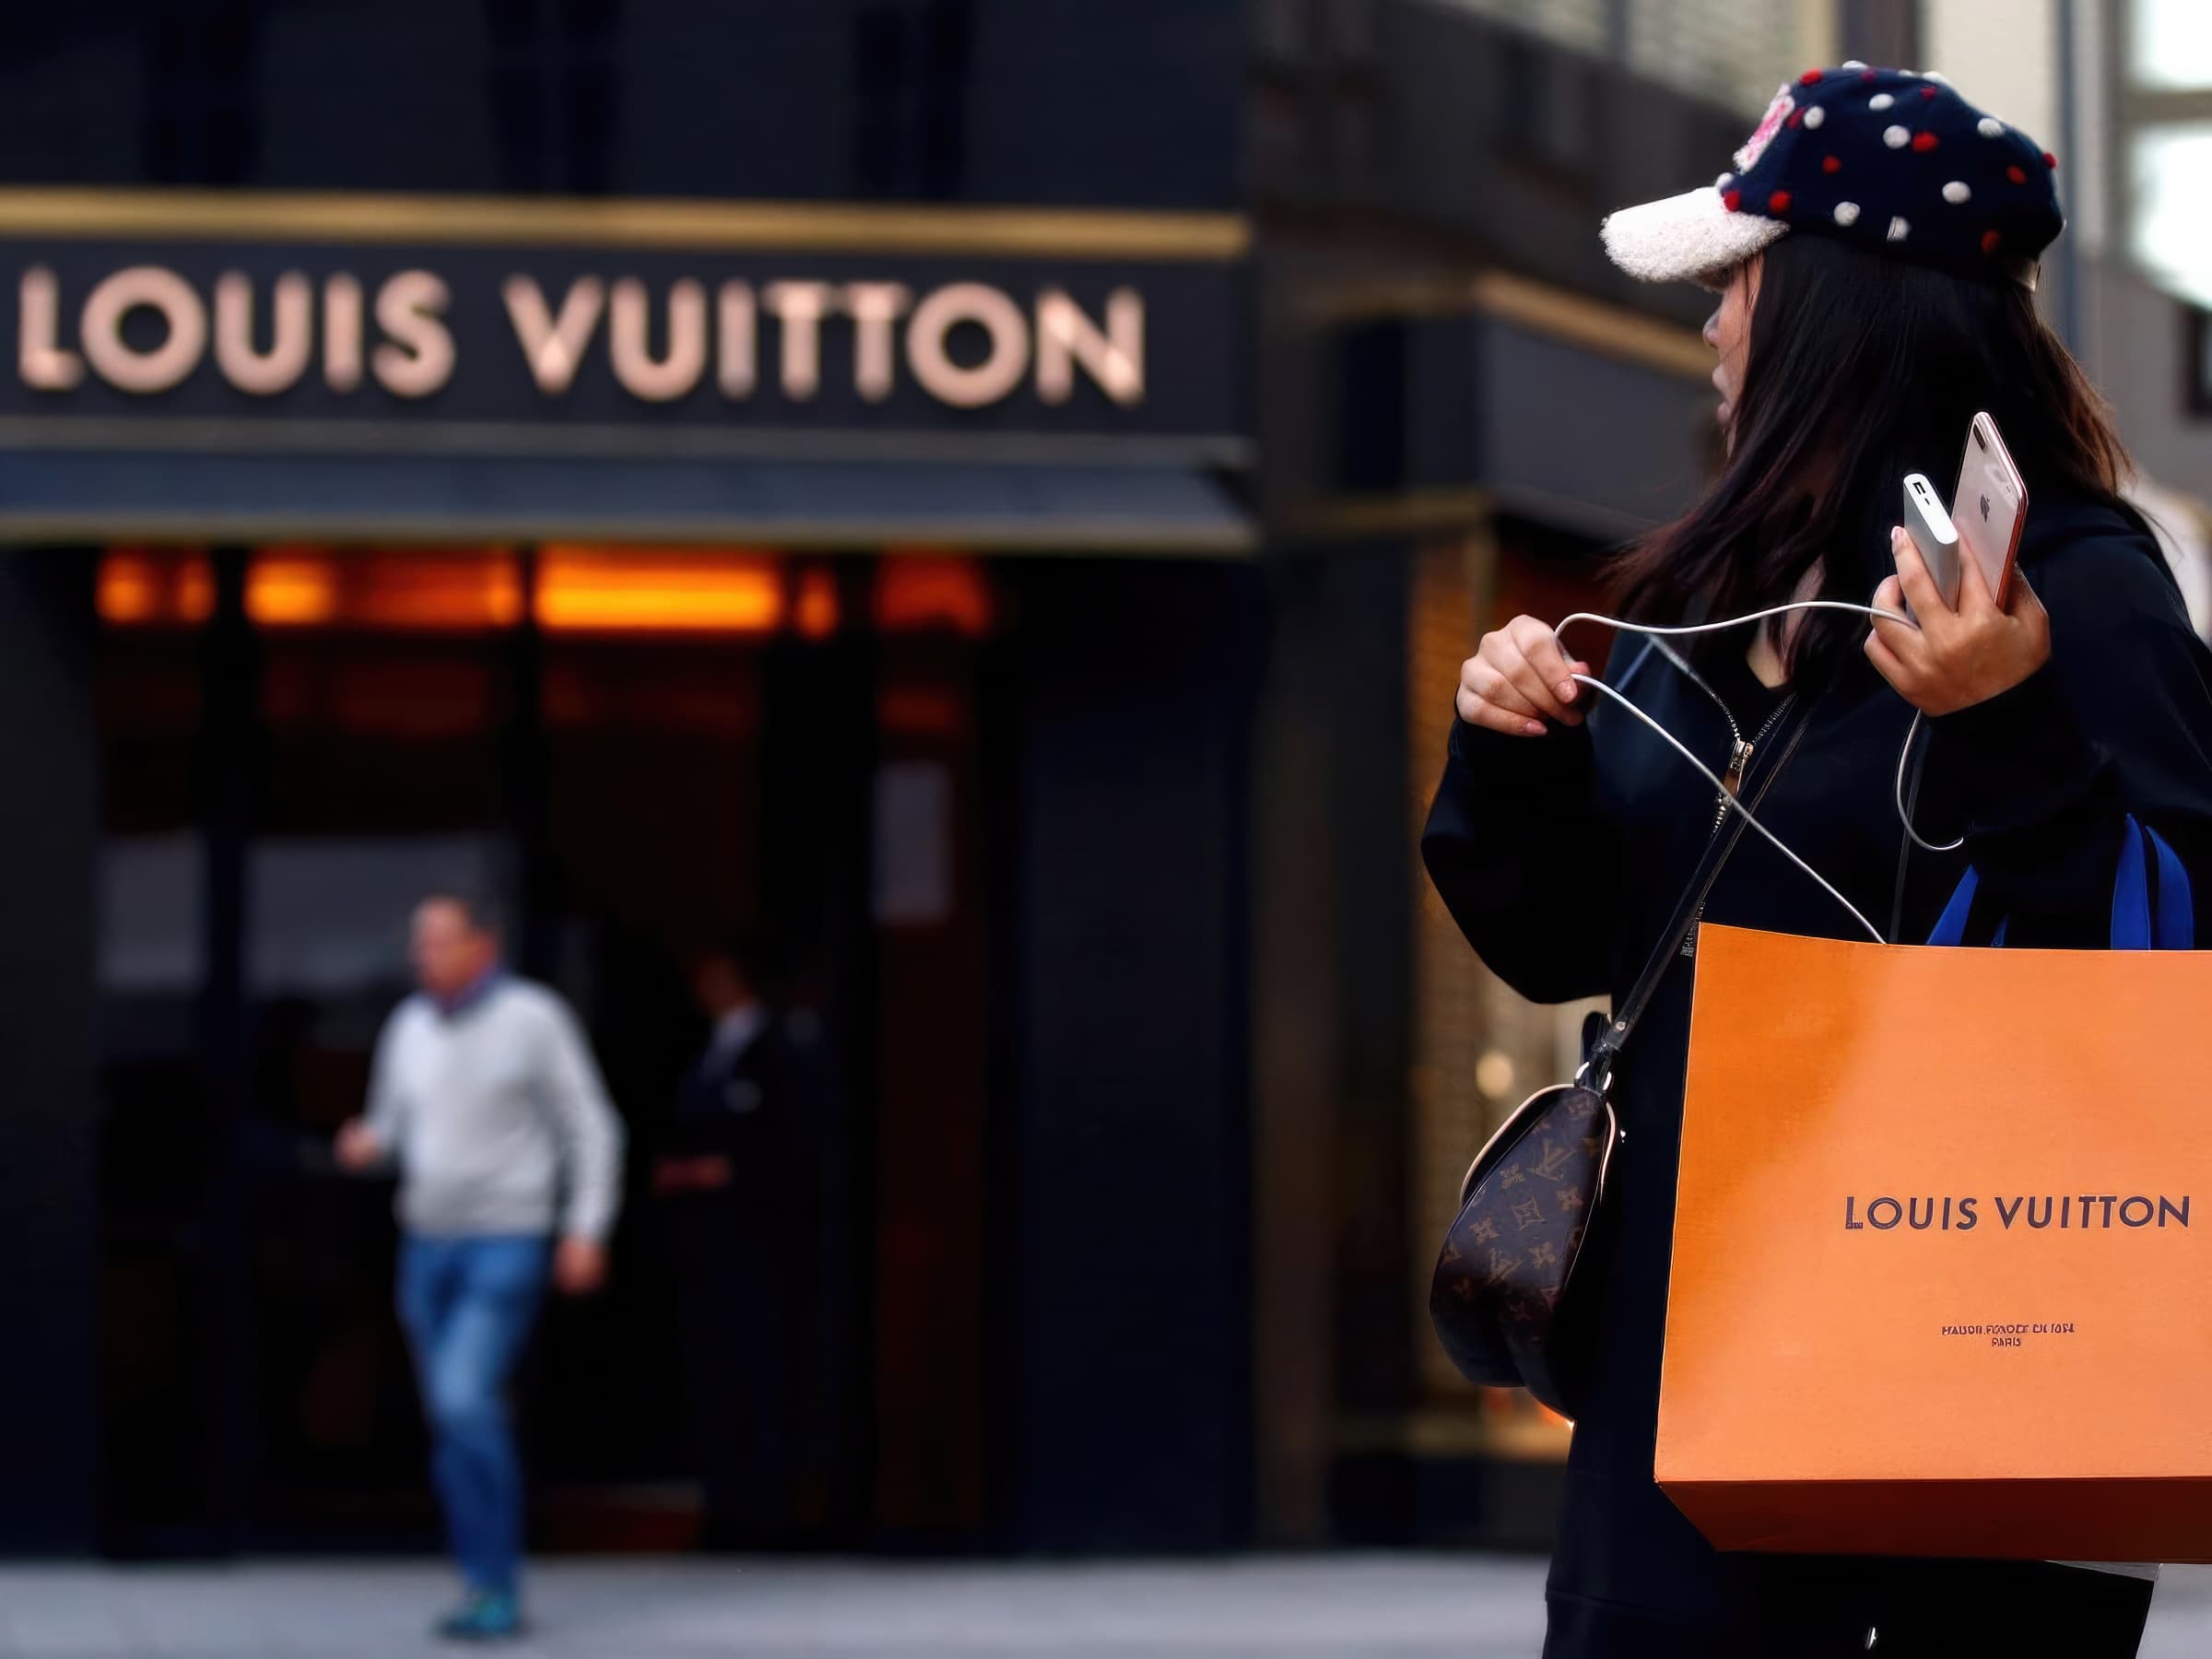 Luxury Stocks Soar Following China's Group Travel Announcement